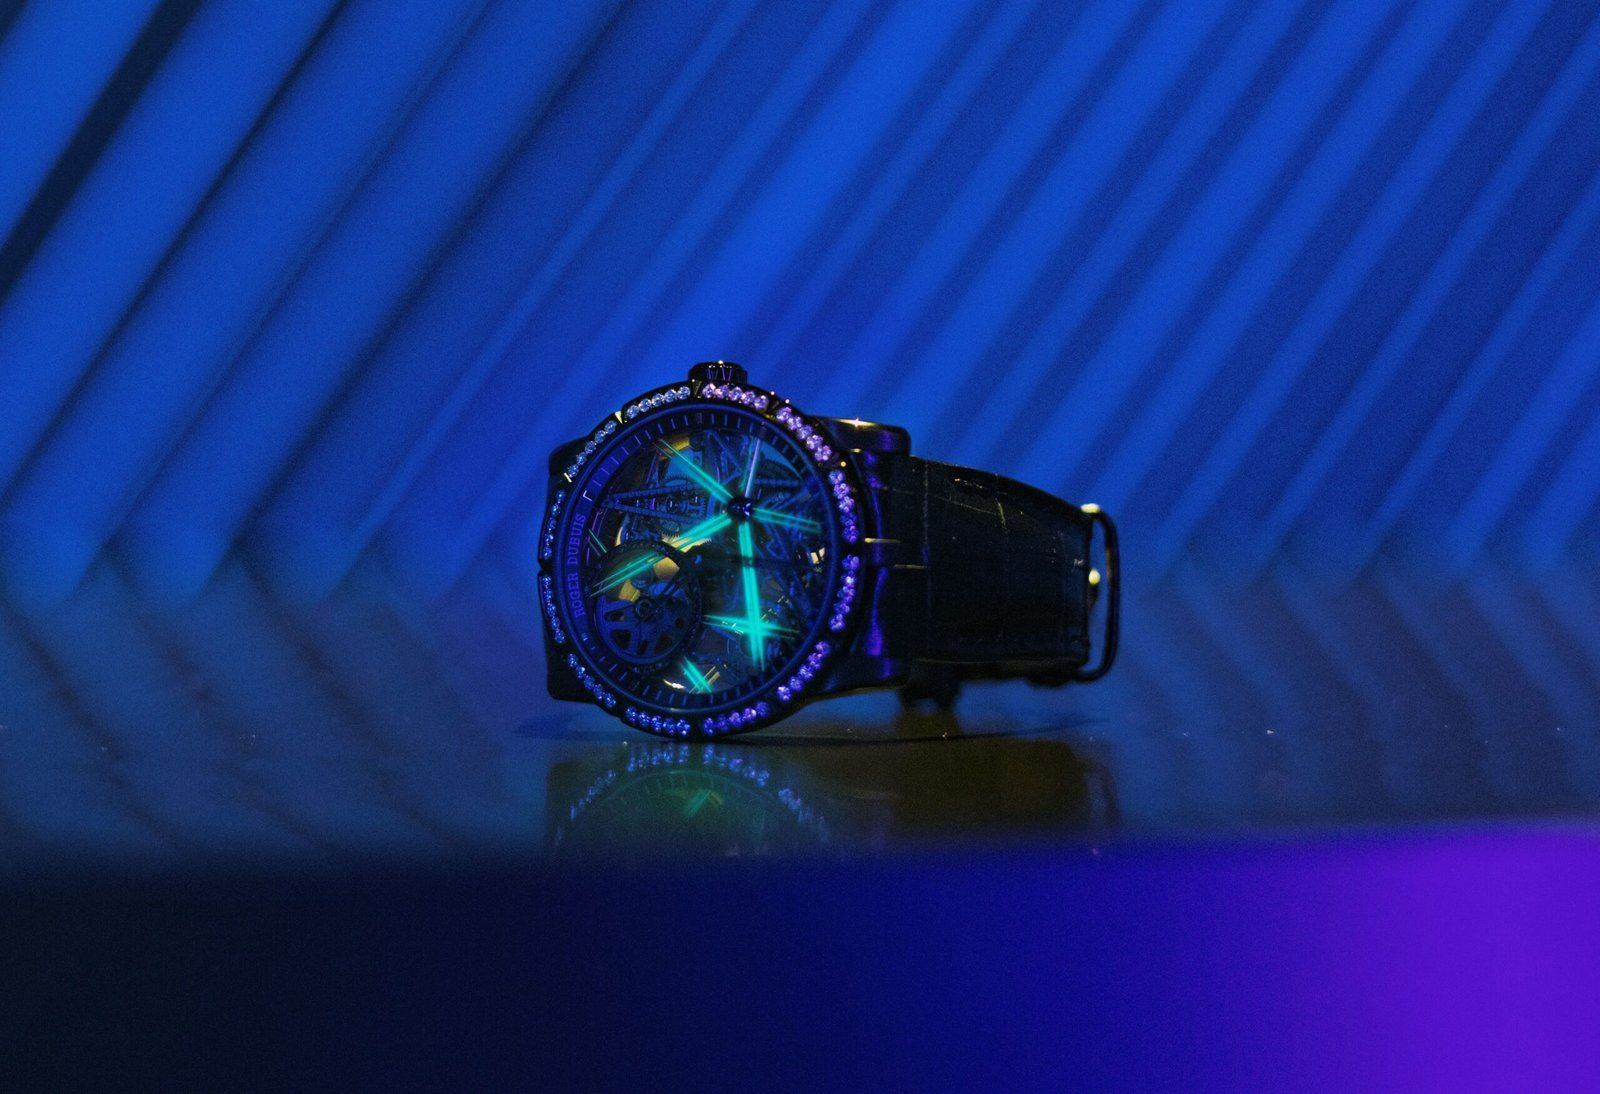 Adding a thrilling new dimension to luminescence is the Roger Dubuis Excalibur Blacklight Trilogy